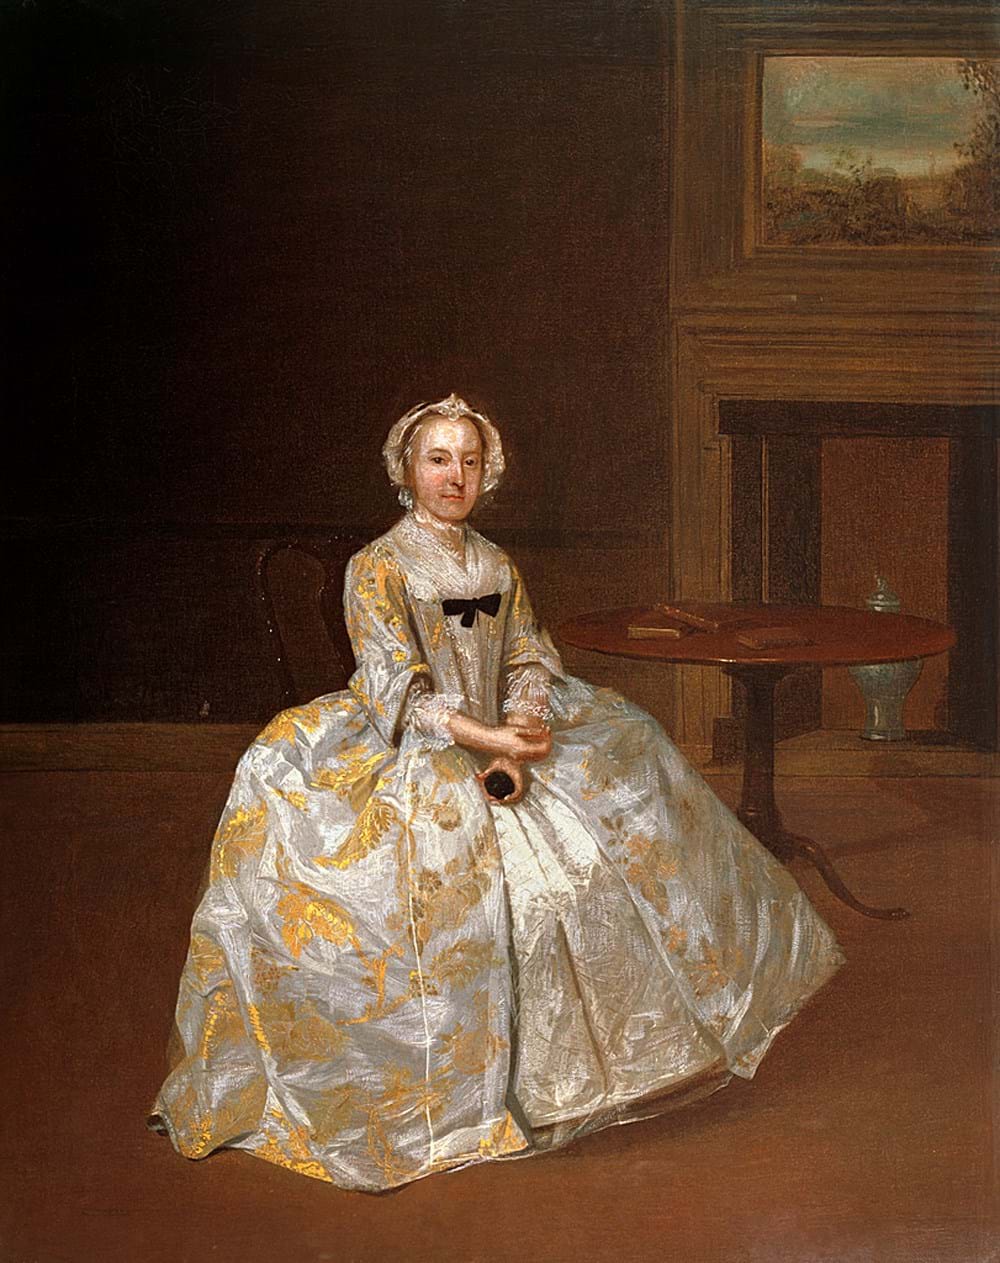 A painted portrait of a person in an elaborate Georgian dress